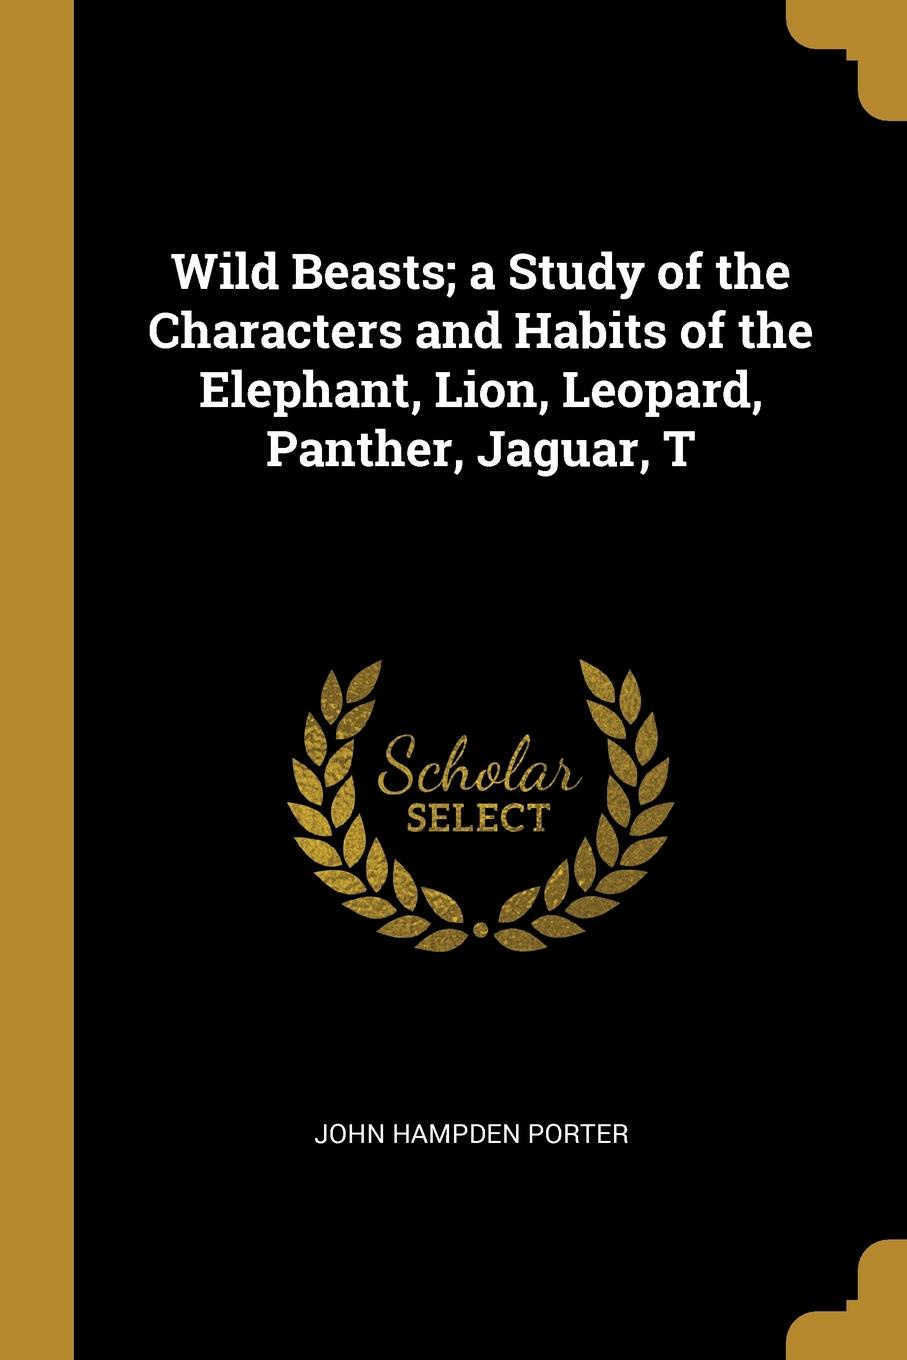 Wild Beasts; a Study of the Characters and Habits of the Elephant, Lion, Leopard, Panther, Jaguar, T